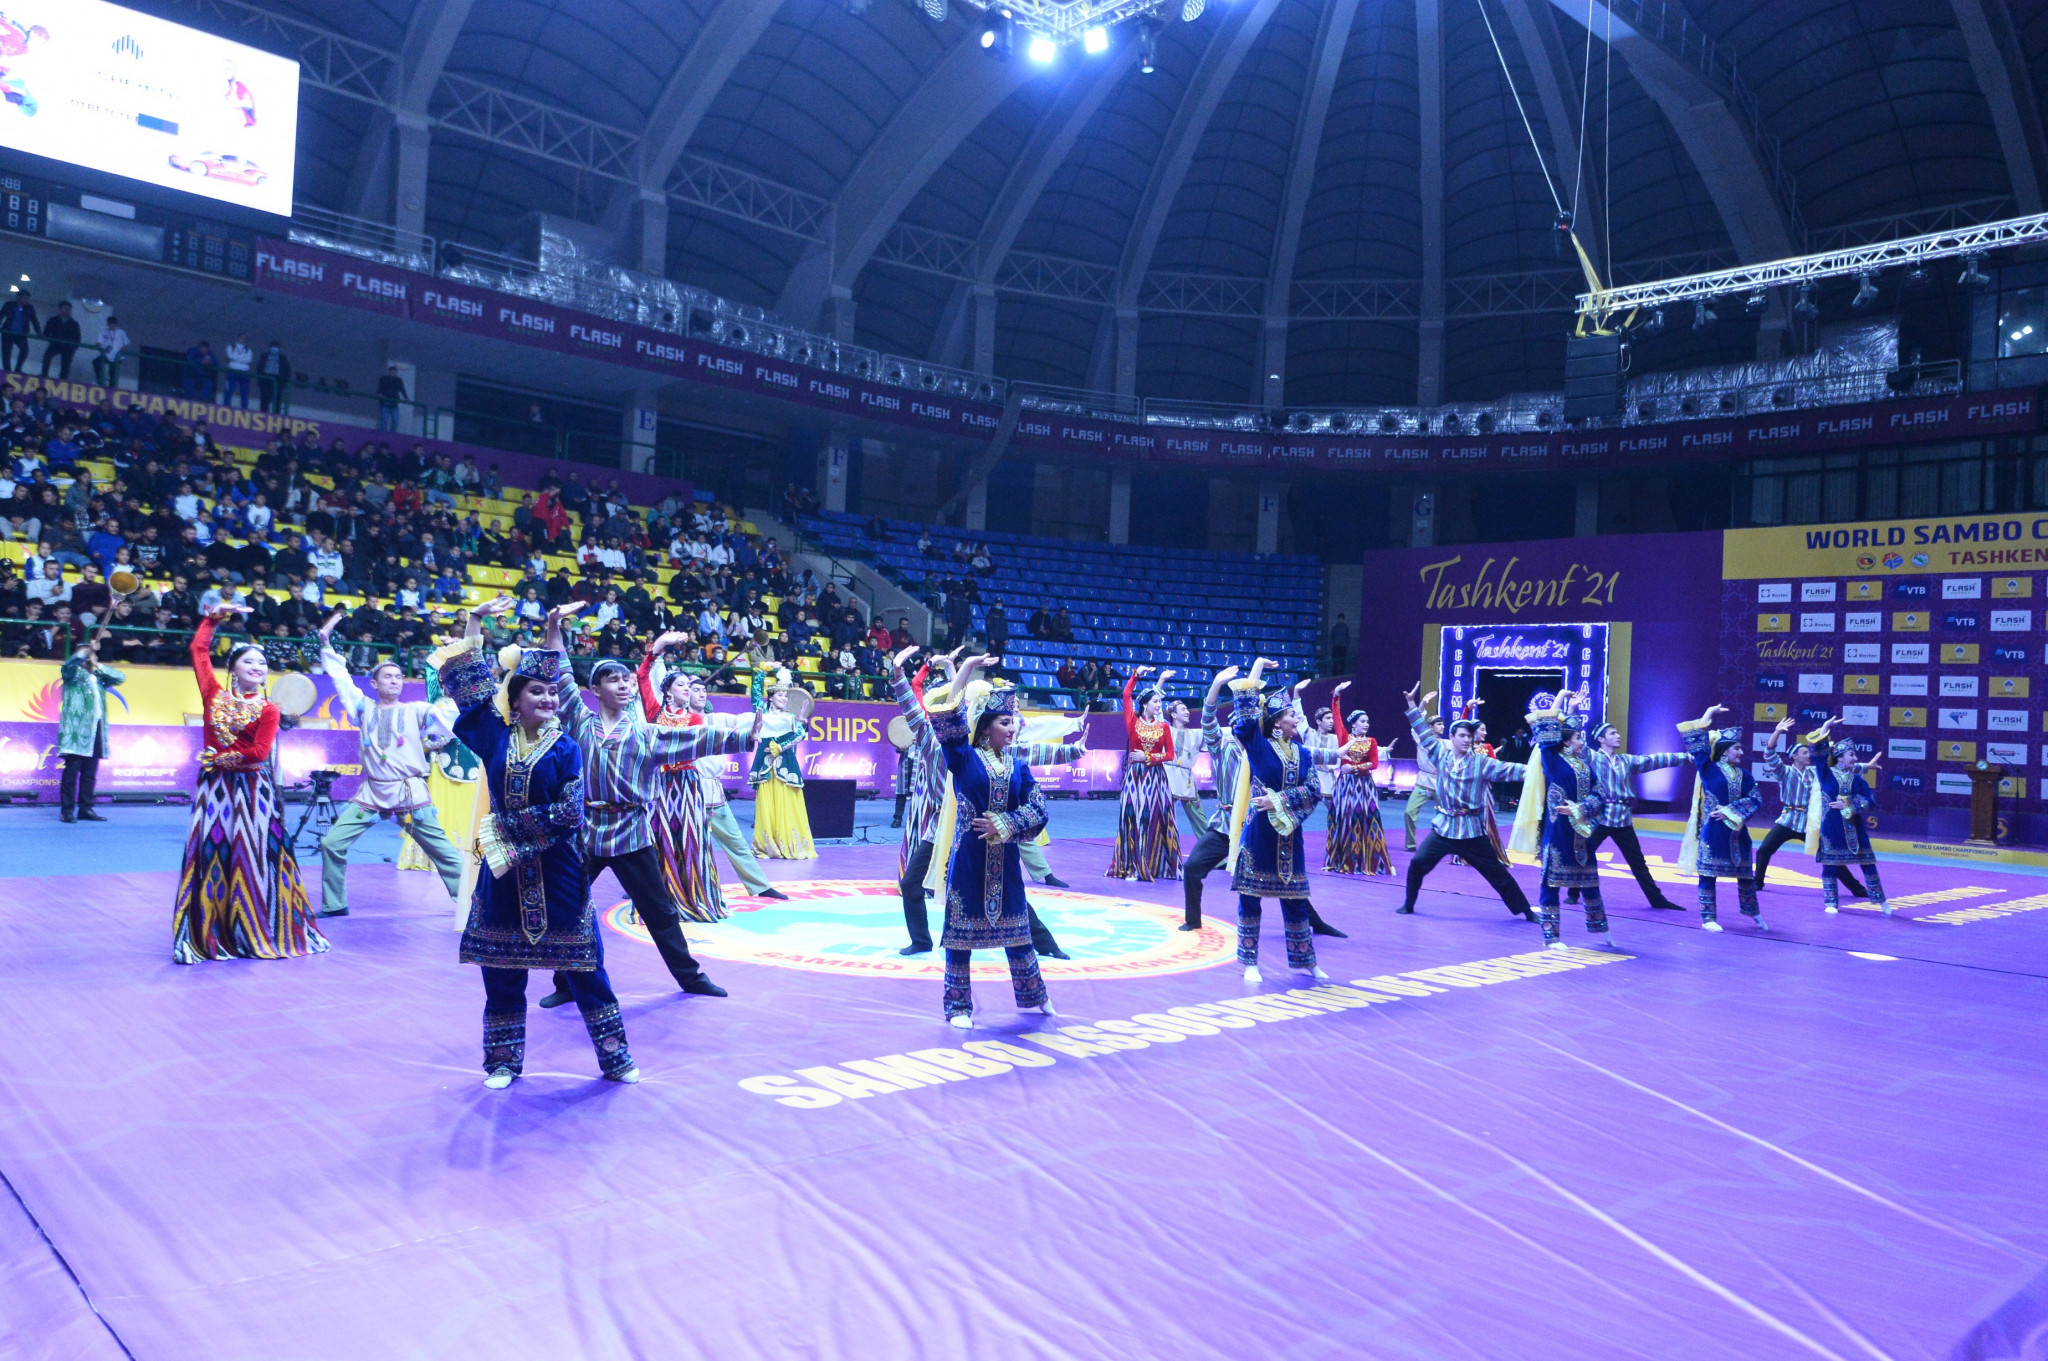 An array of traditional dances marked the start of the World Sambo Championships ©FIAS